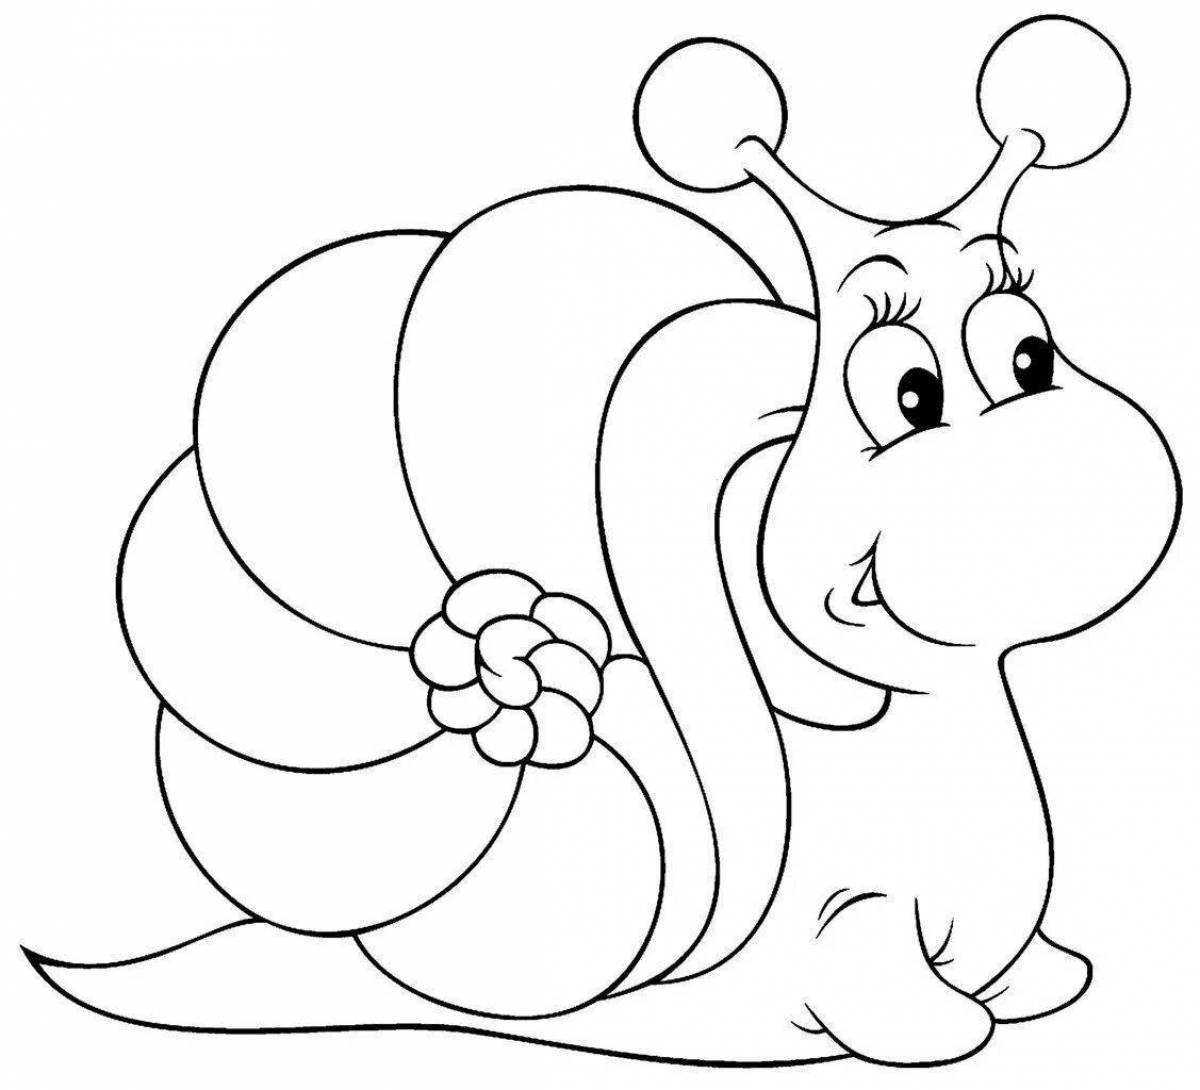 Amazing snail coloring pages for kids